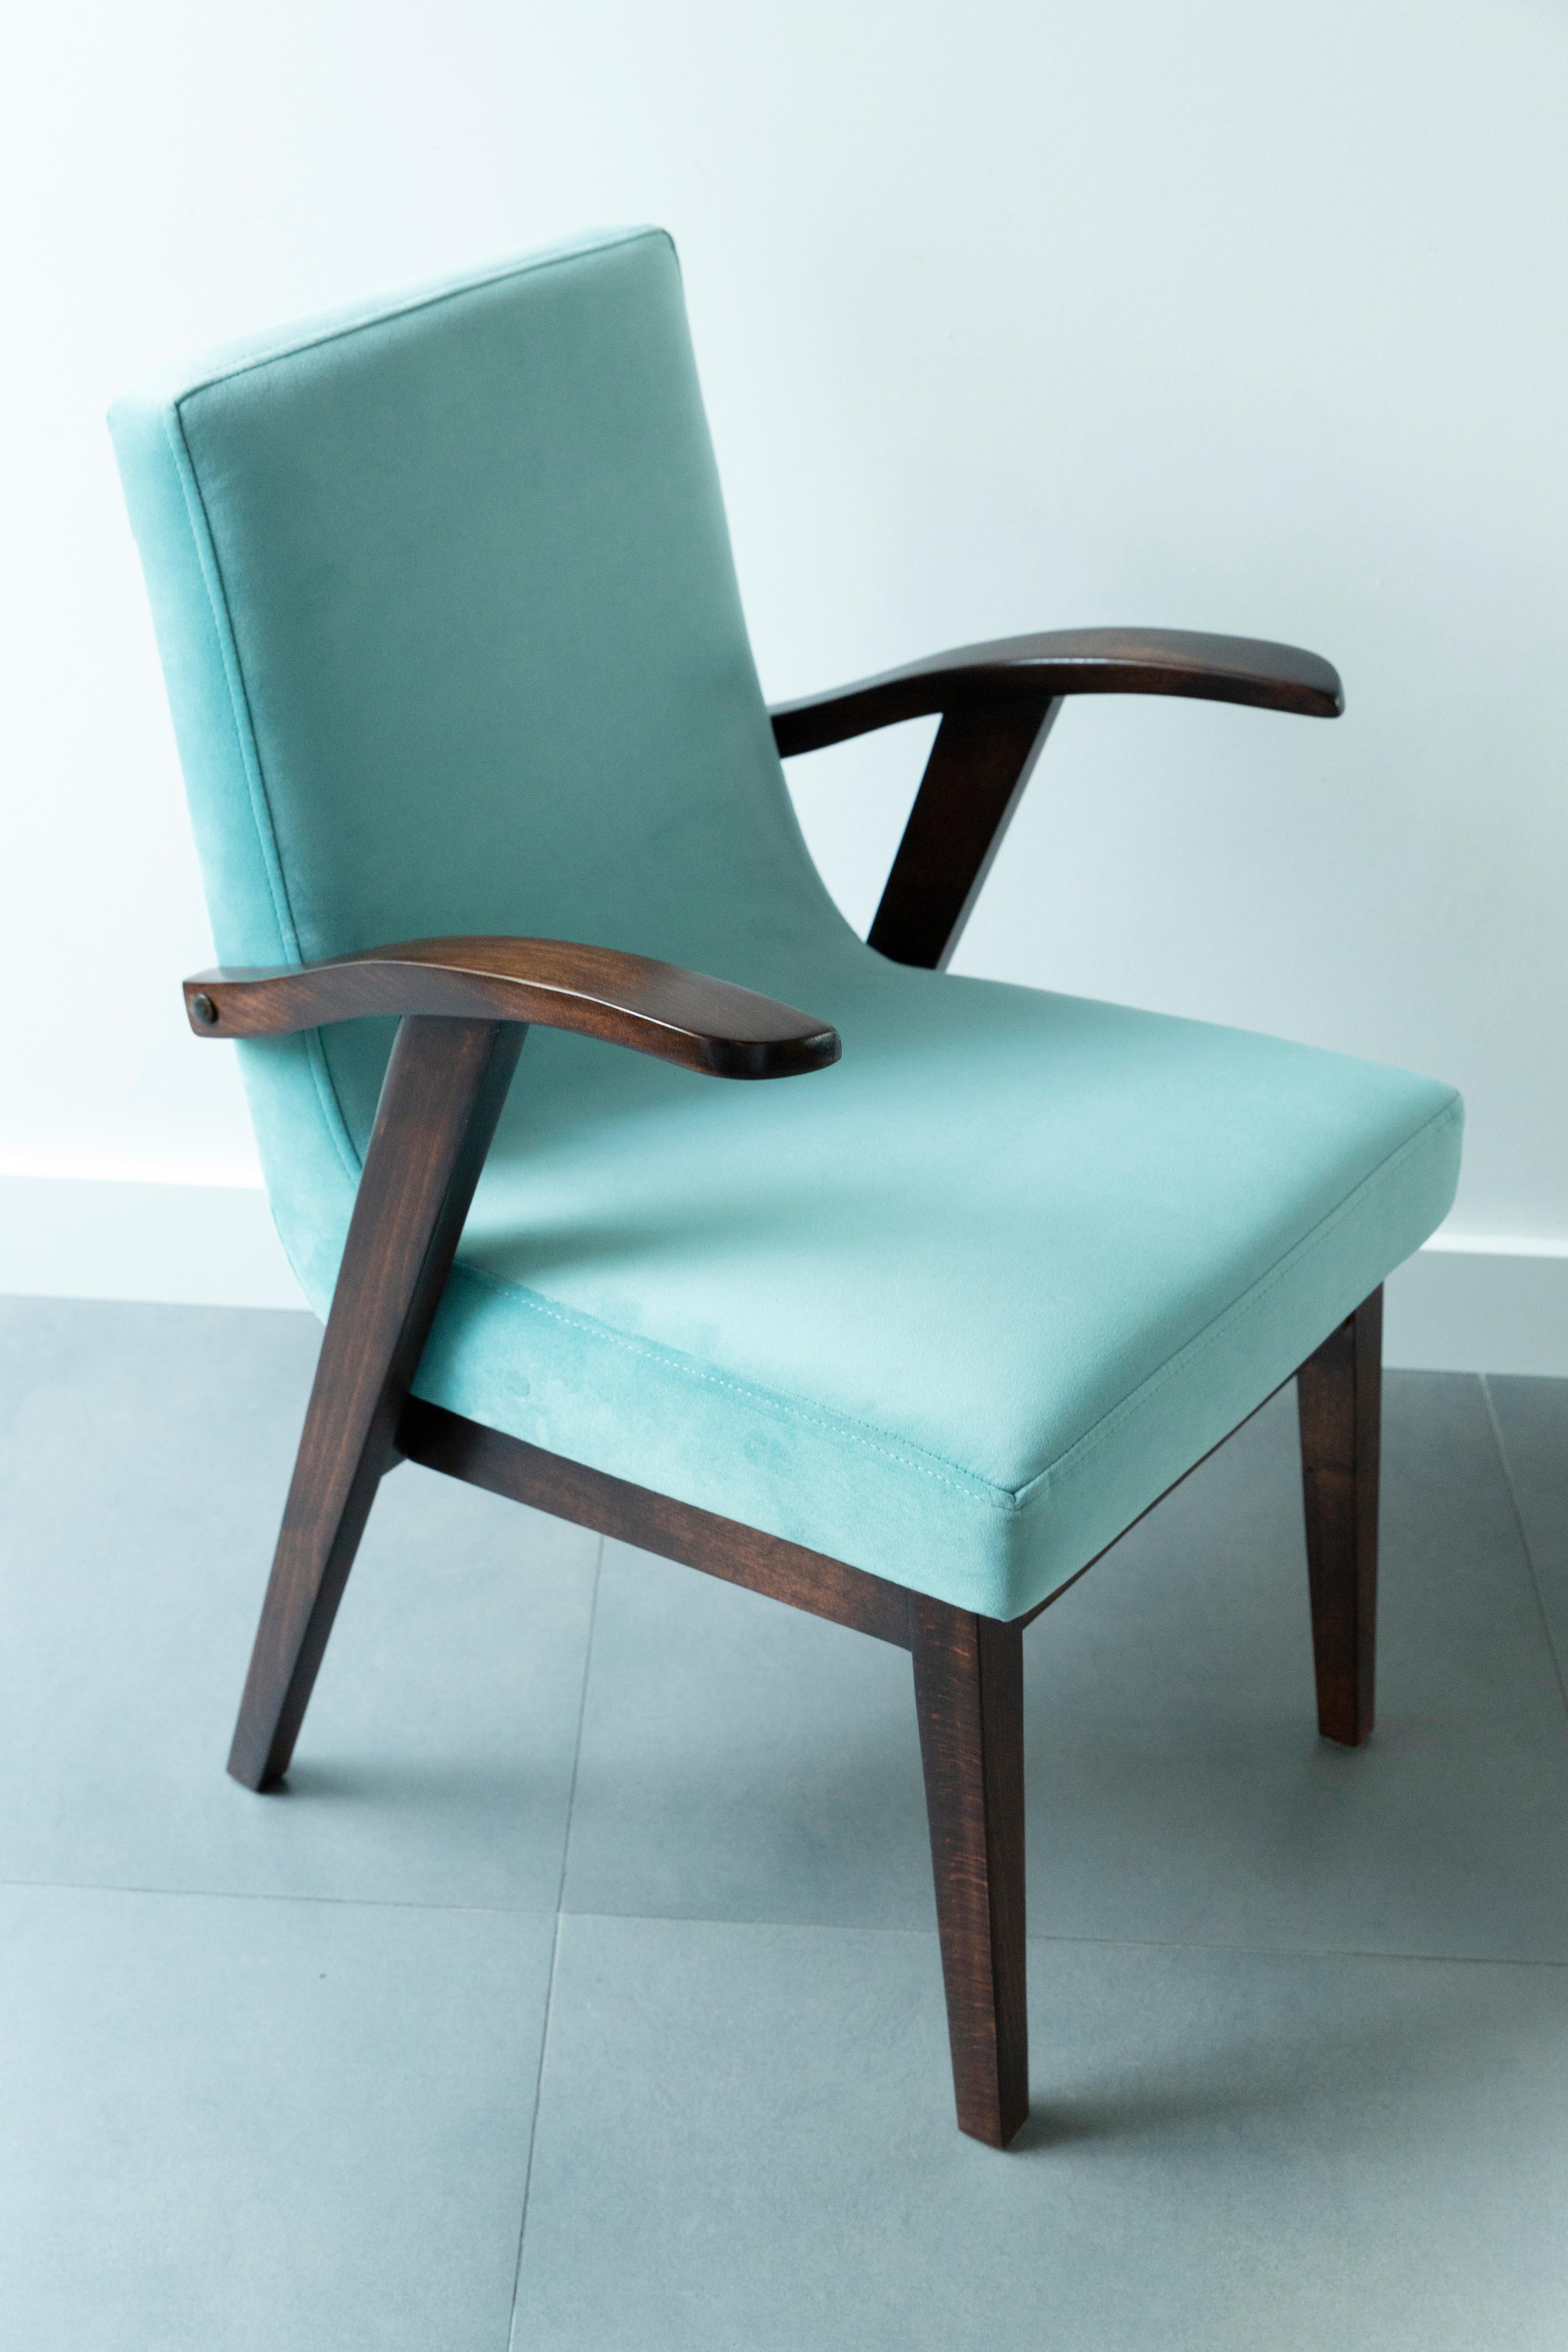 Polish 20th Century Vintage Mint Green Armchair by Mieczyslaw Puchala, 1960s For Sale